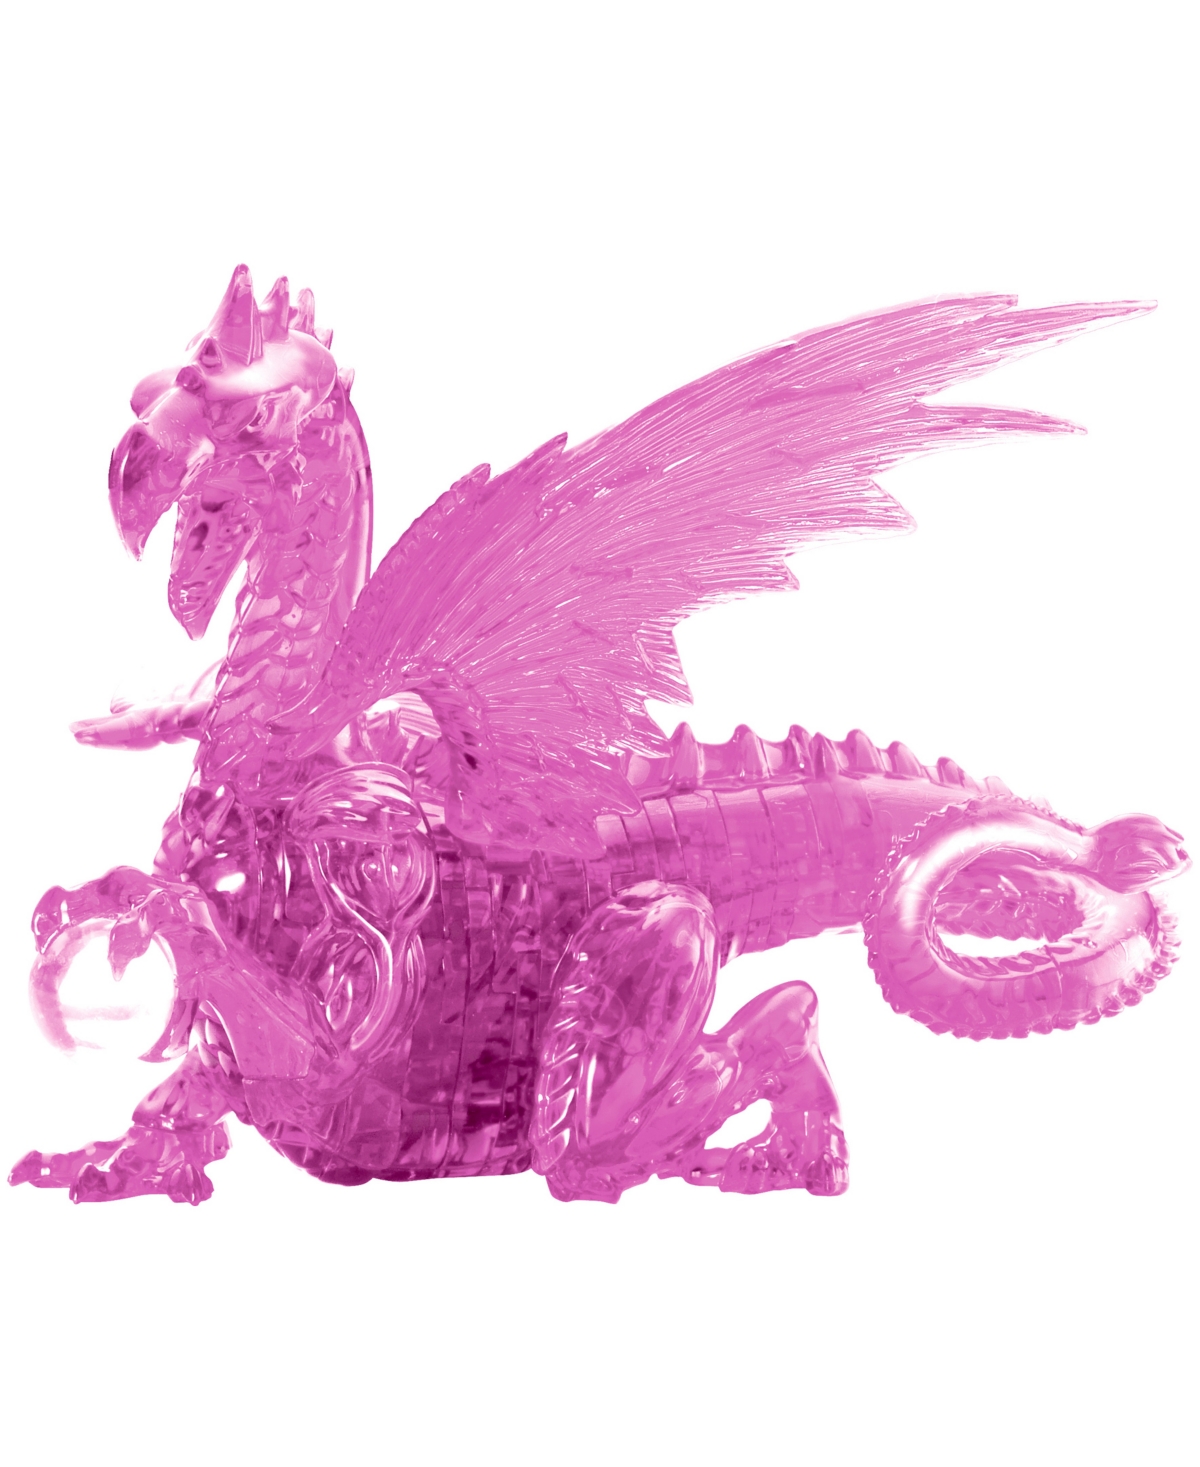 University Games Kids' Bepuzzled 3d Crystal Puzzle Dragon, 57 Pieces In No Color